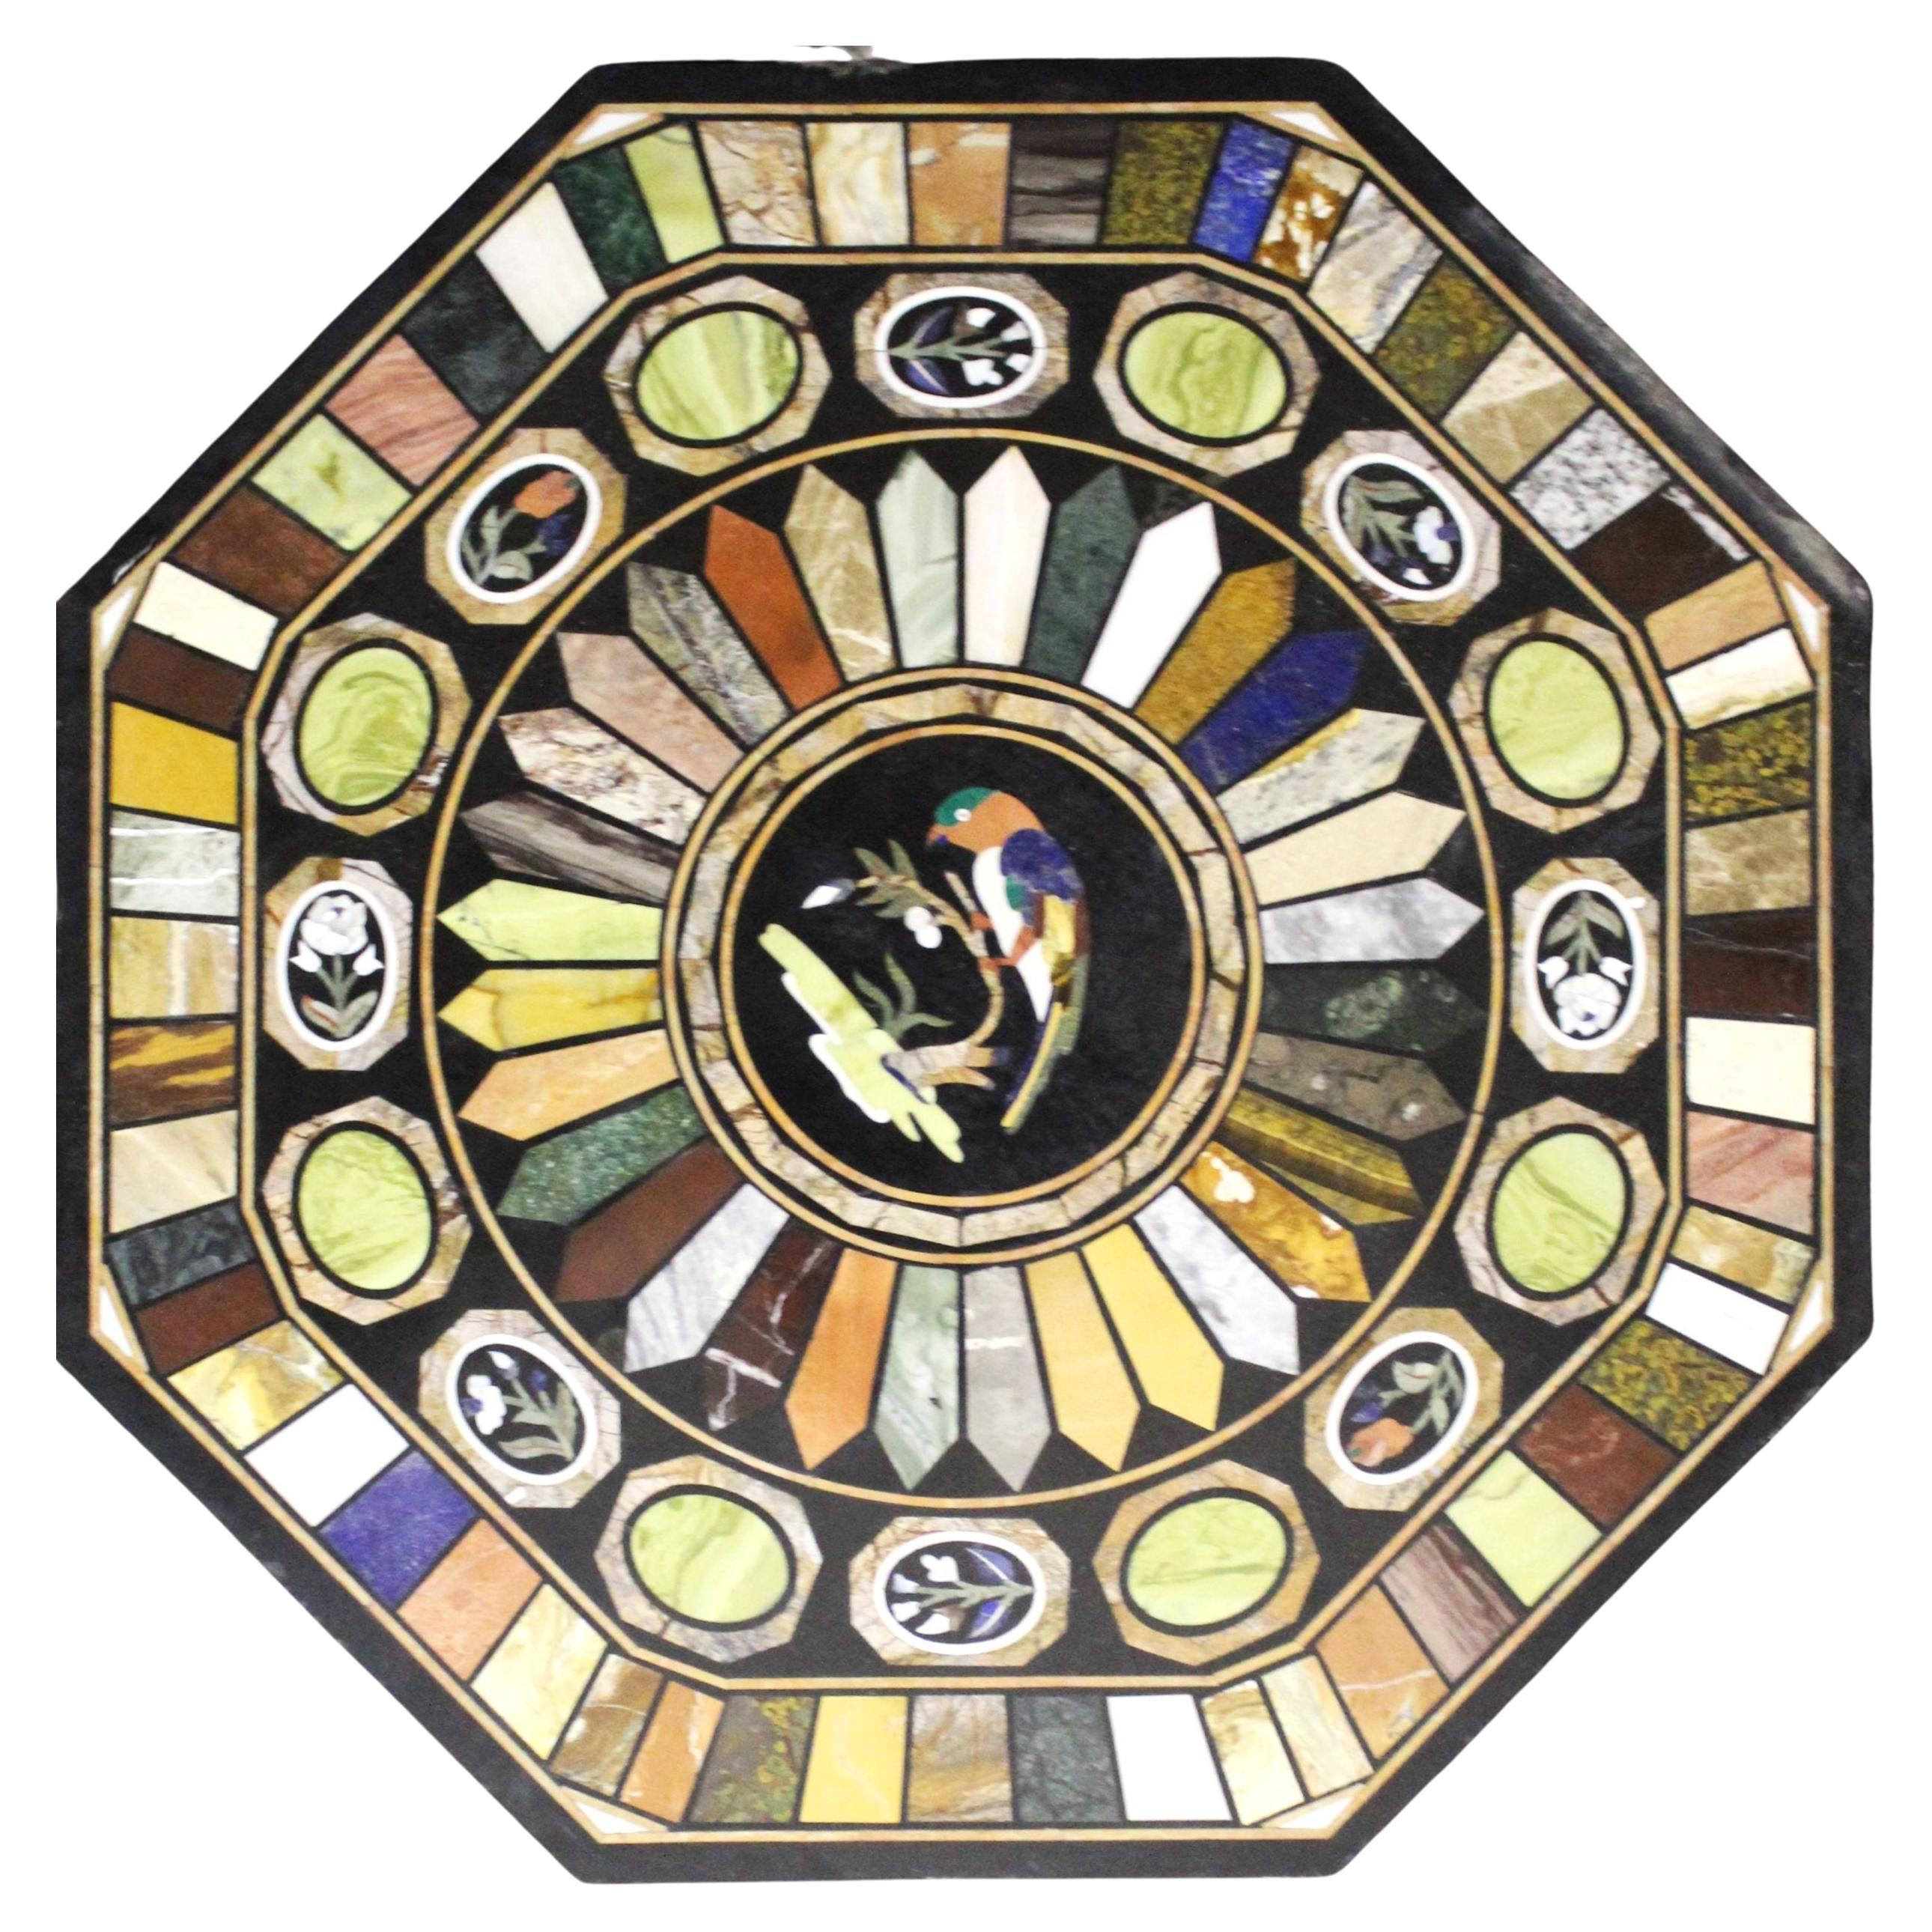 Marble top inlaid with semi-precious stones